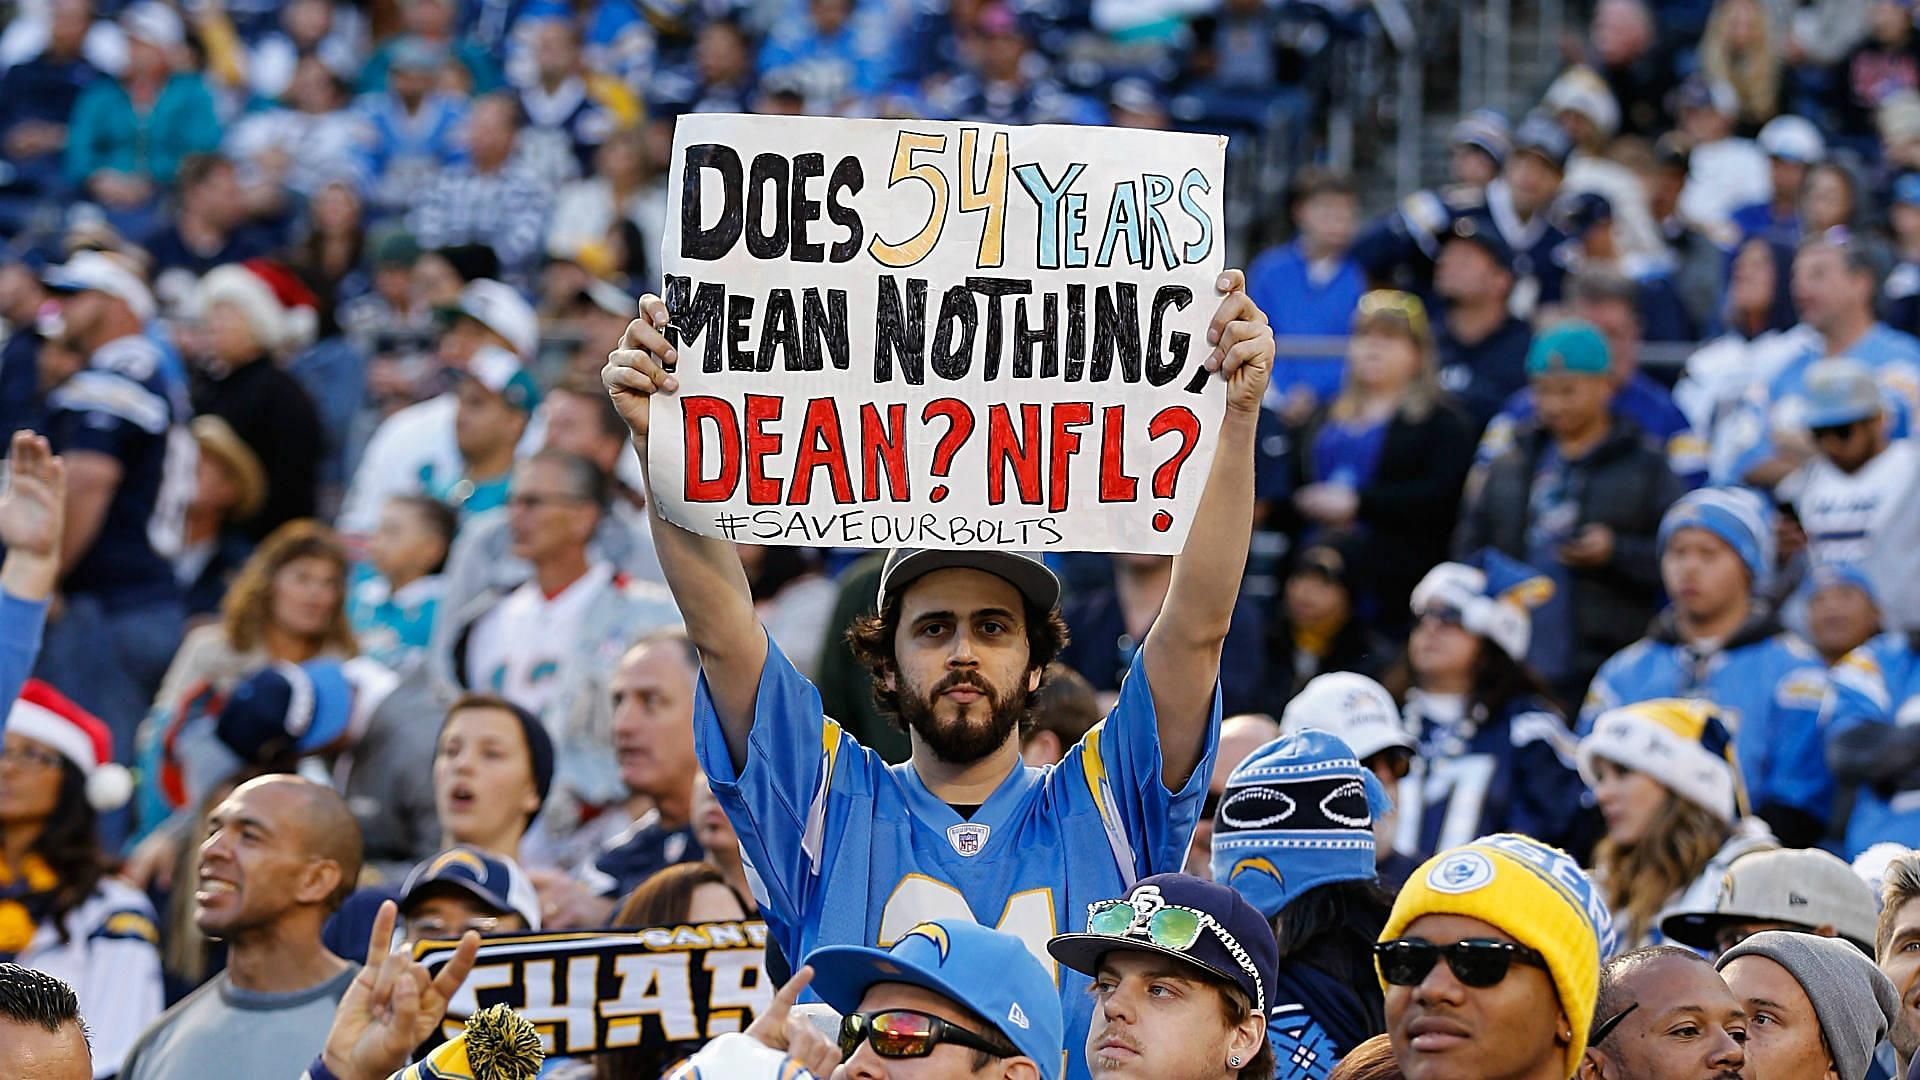 A Chargers fan protests the move to Los Angeles